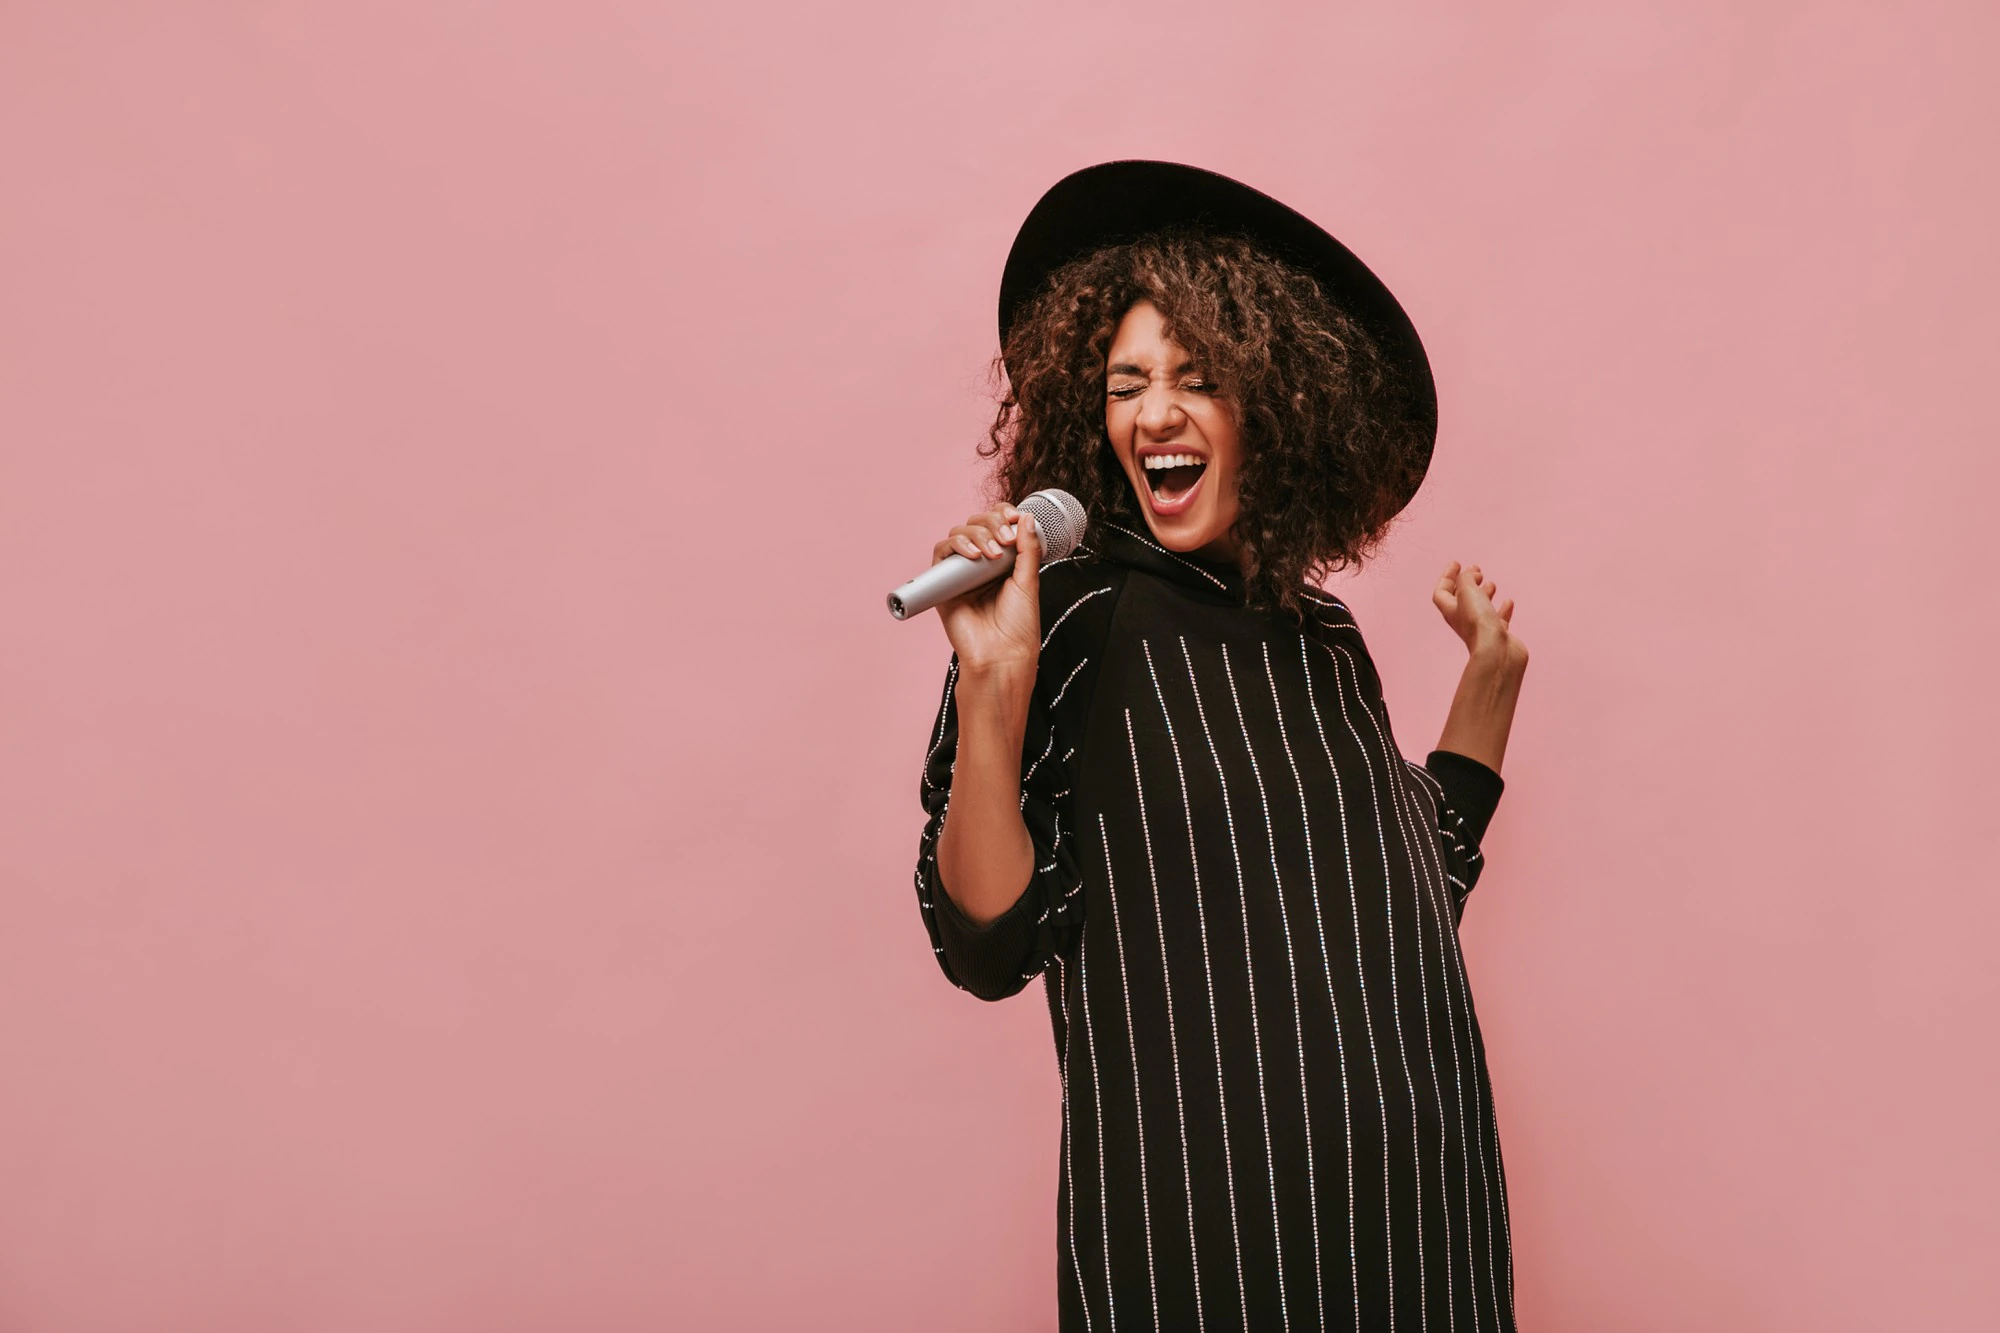 emotional woman with curly brunette hairstyle in stylish hat and striped black dress holding microphone and singing on pink wall 197531 23468